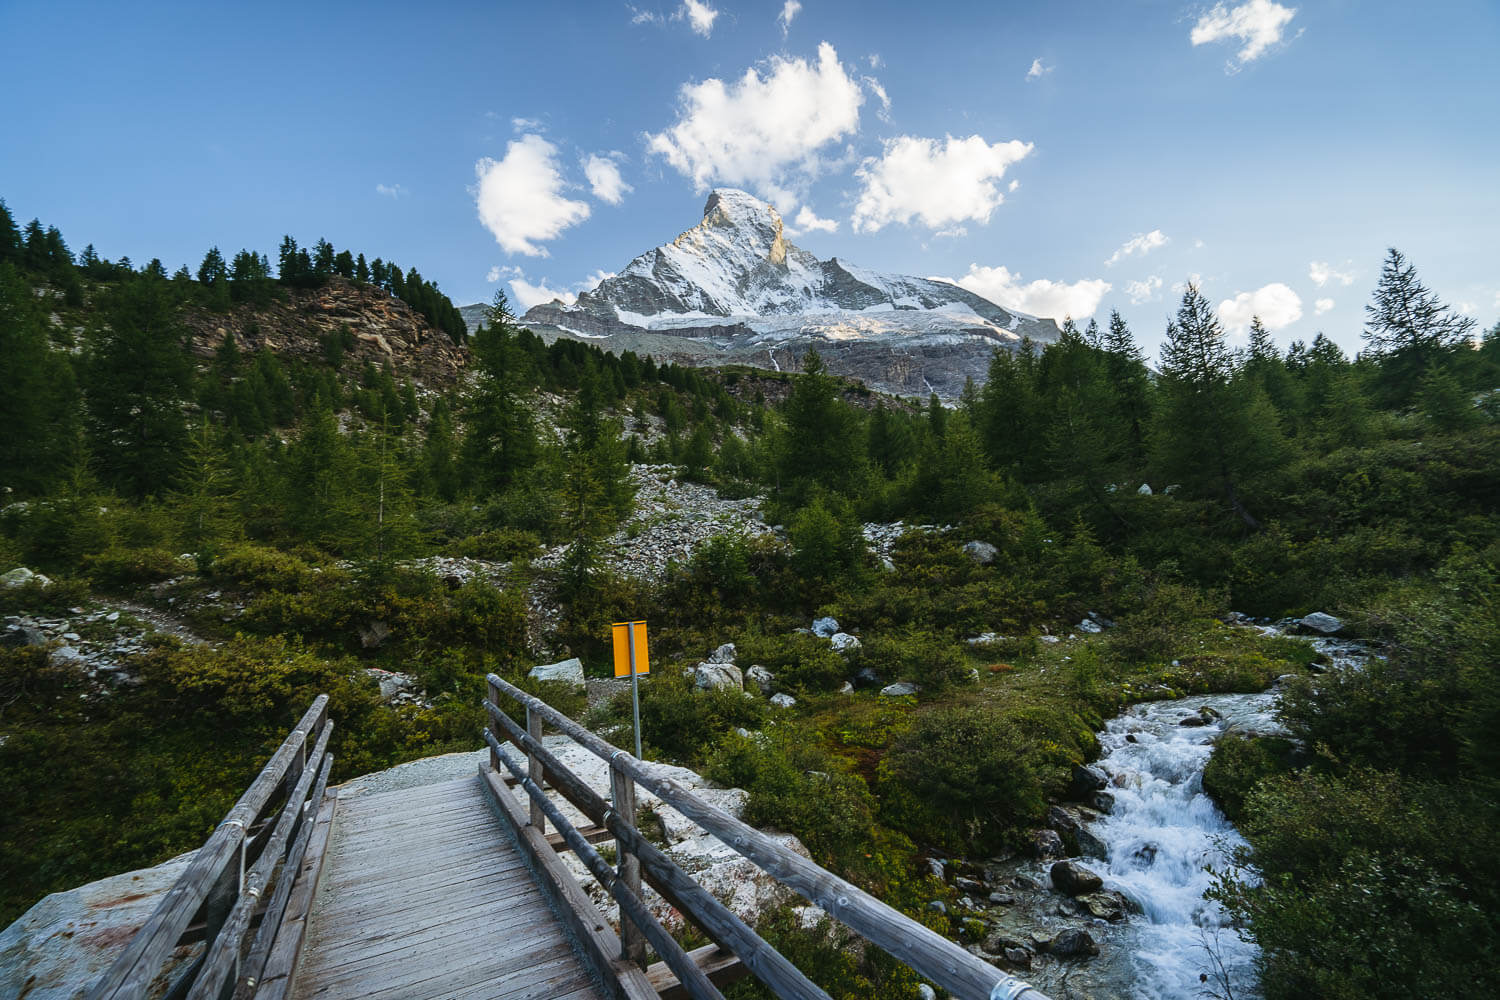 A bridge and glacier river on Edelweisweg